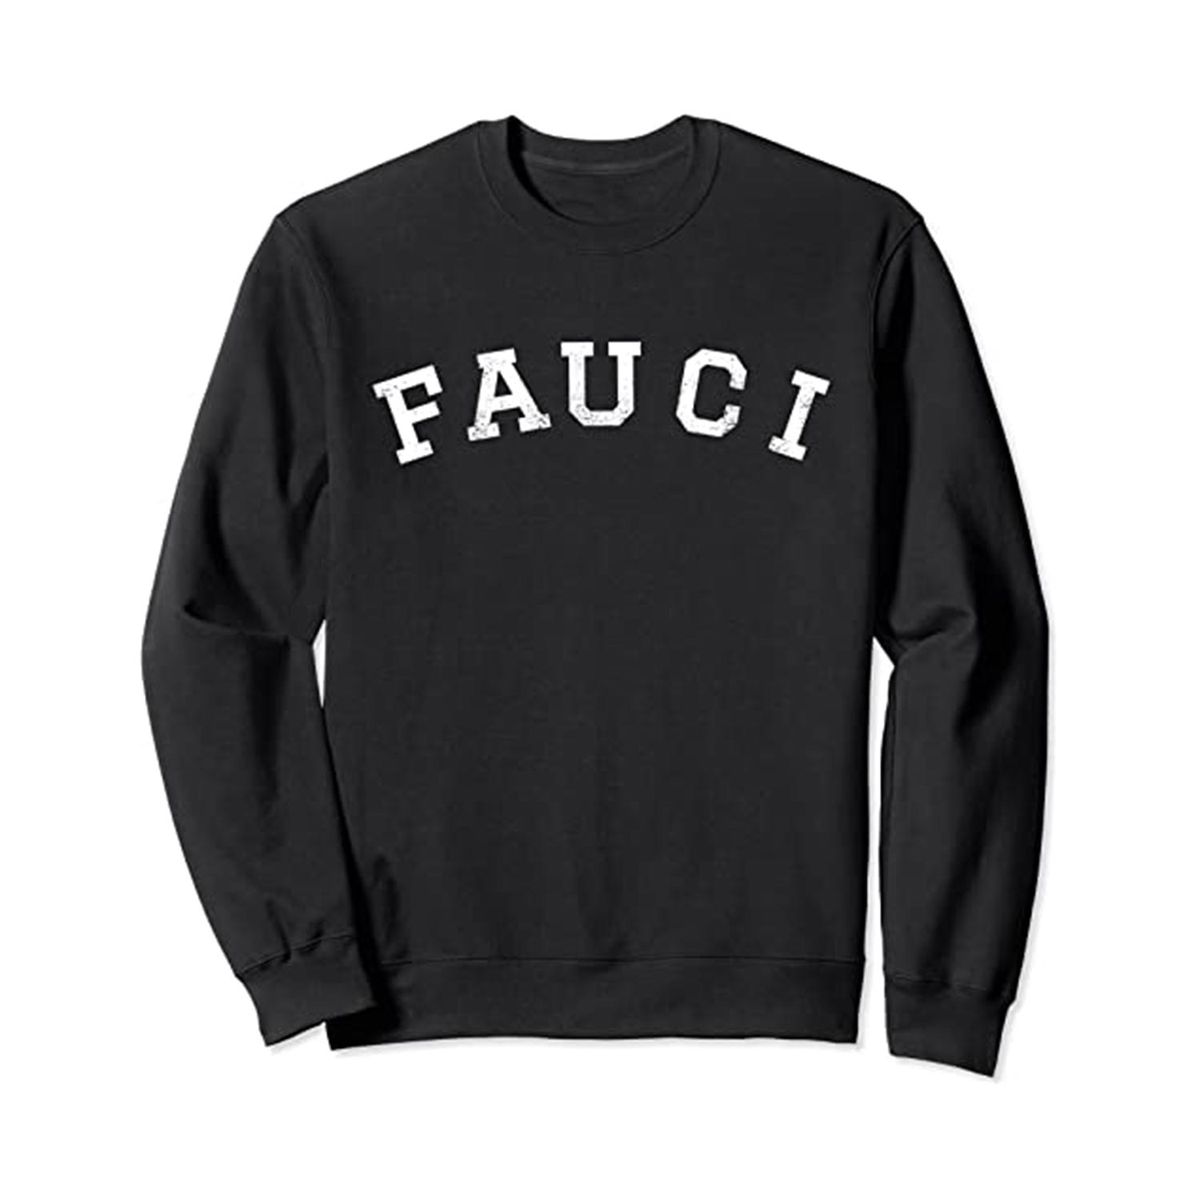 Team Fauci Dr. Anthony Fauci Sweater